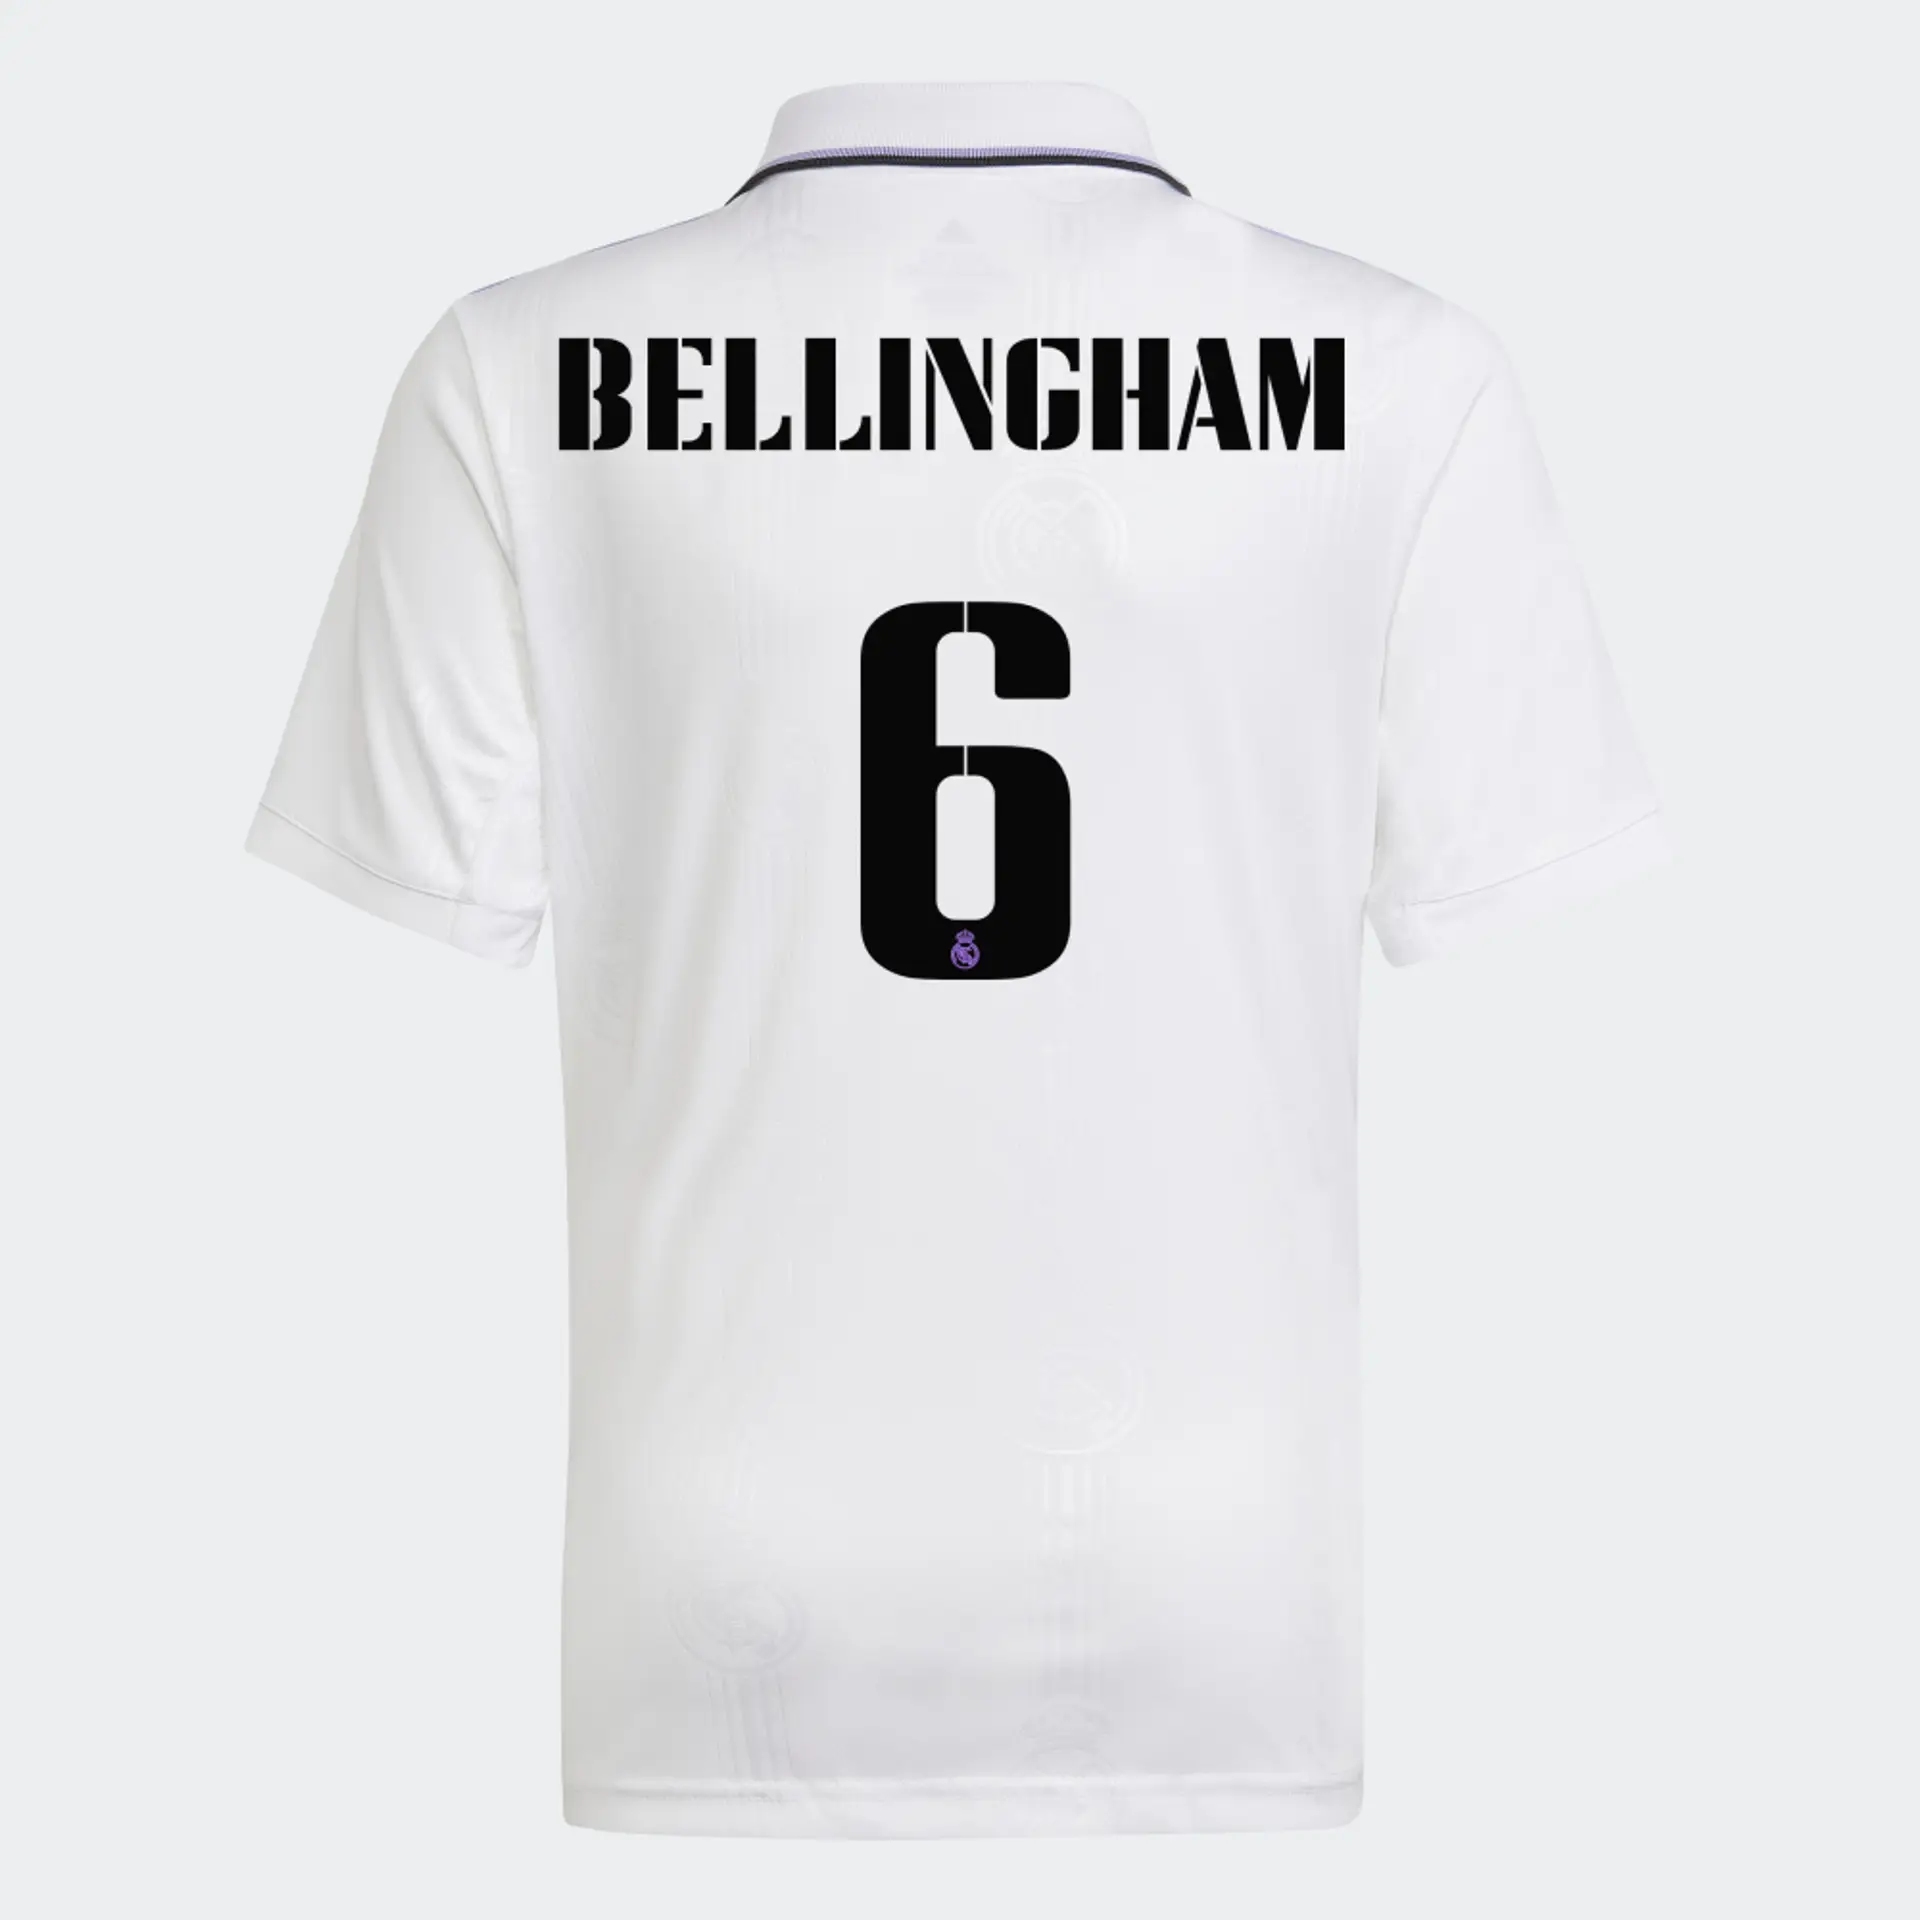 Why Jude Bellingham will wear number 5 at Real Madrid after Dortmund  transfer - The Athletic